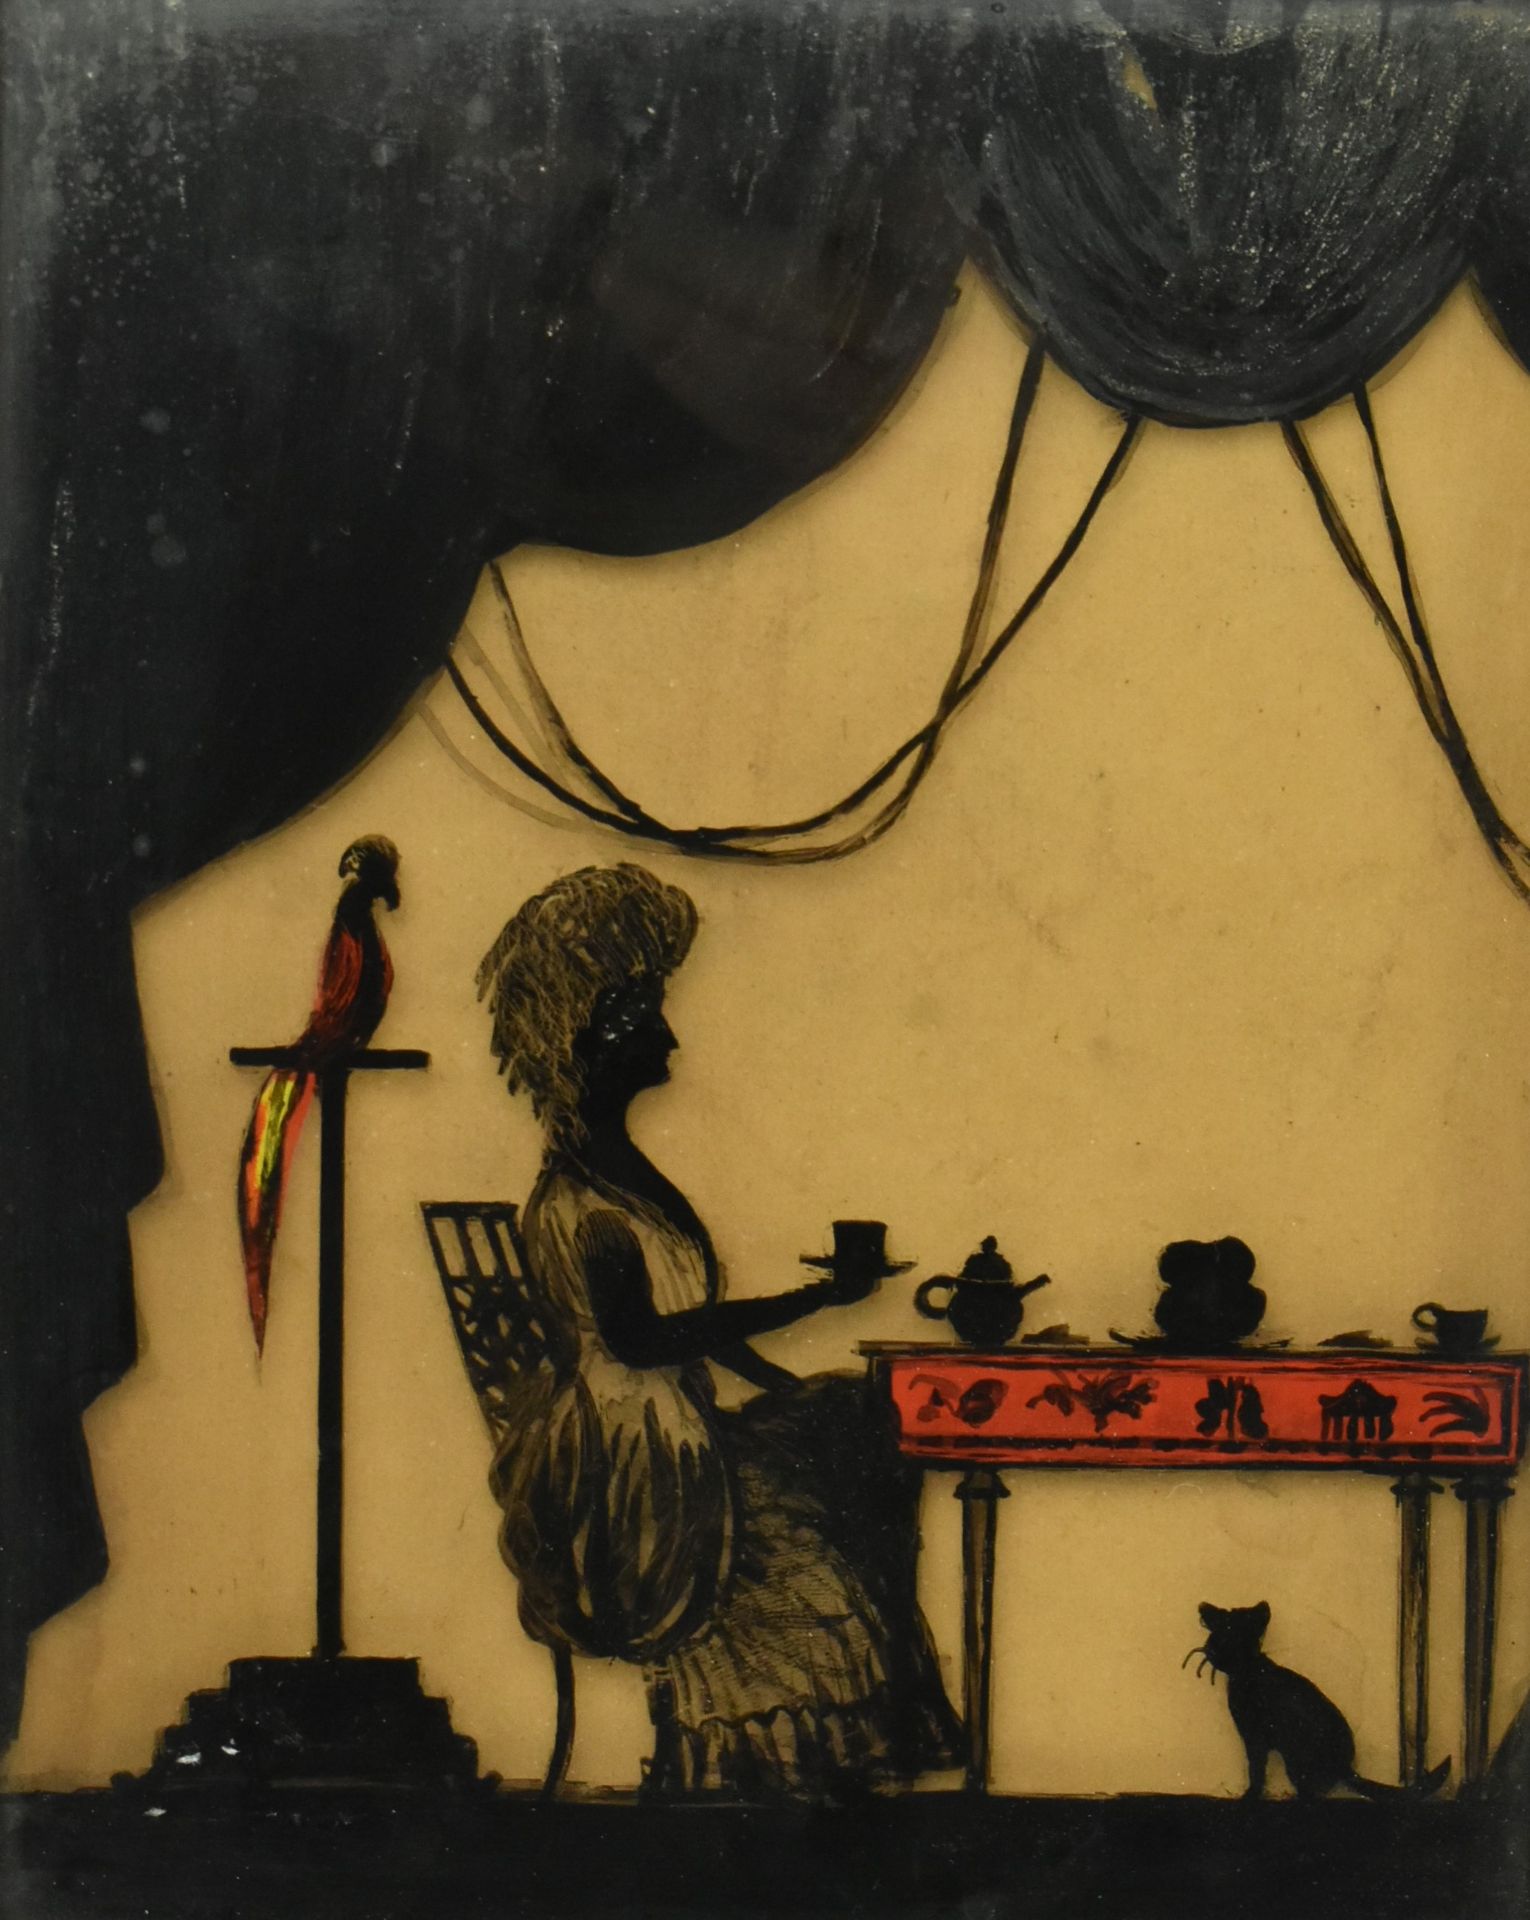 19TH CENTURY VICTORIAN REVERSE GLASS SILHOUETTE PAINTING